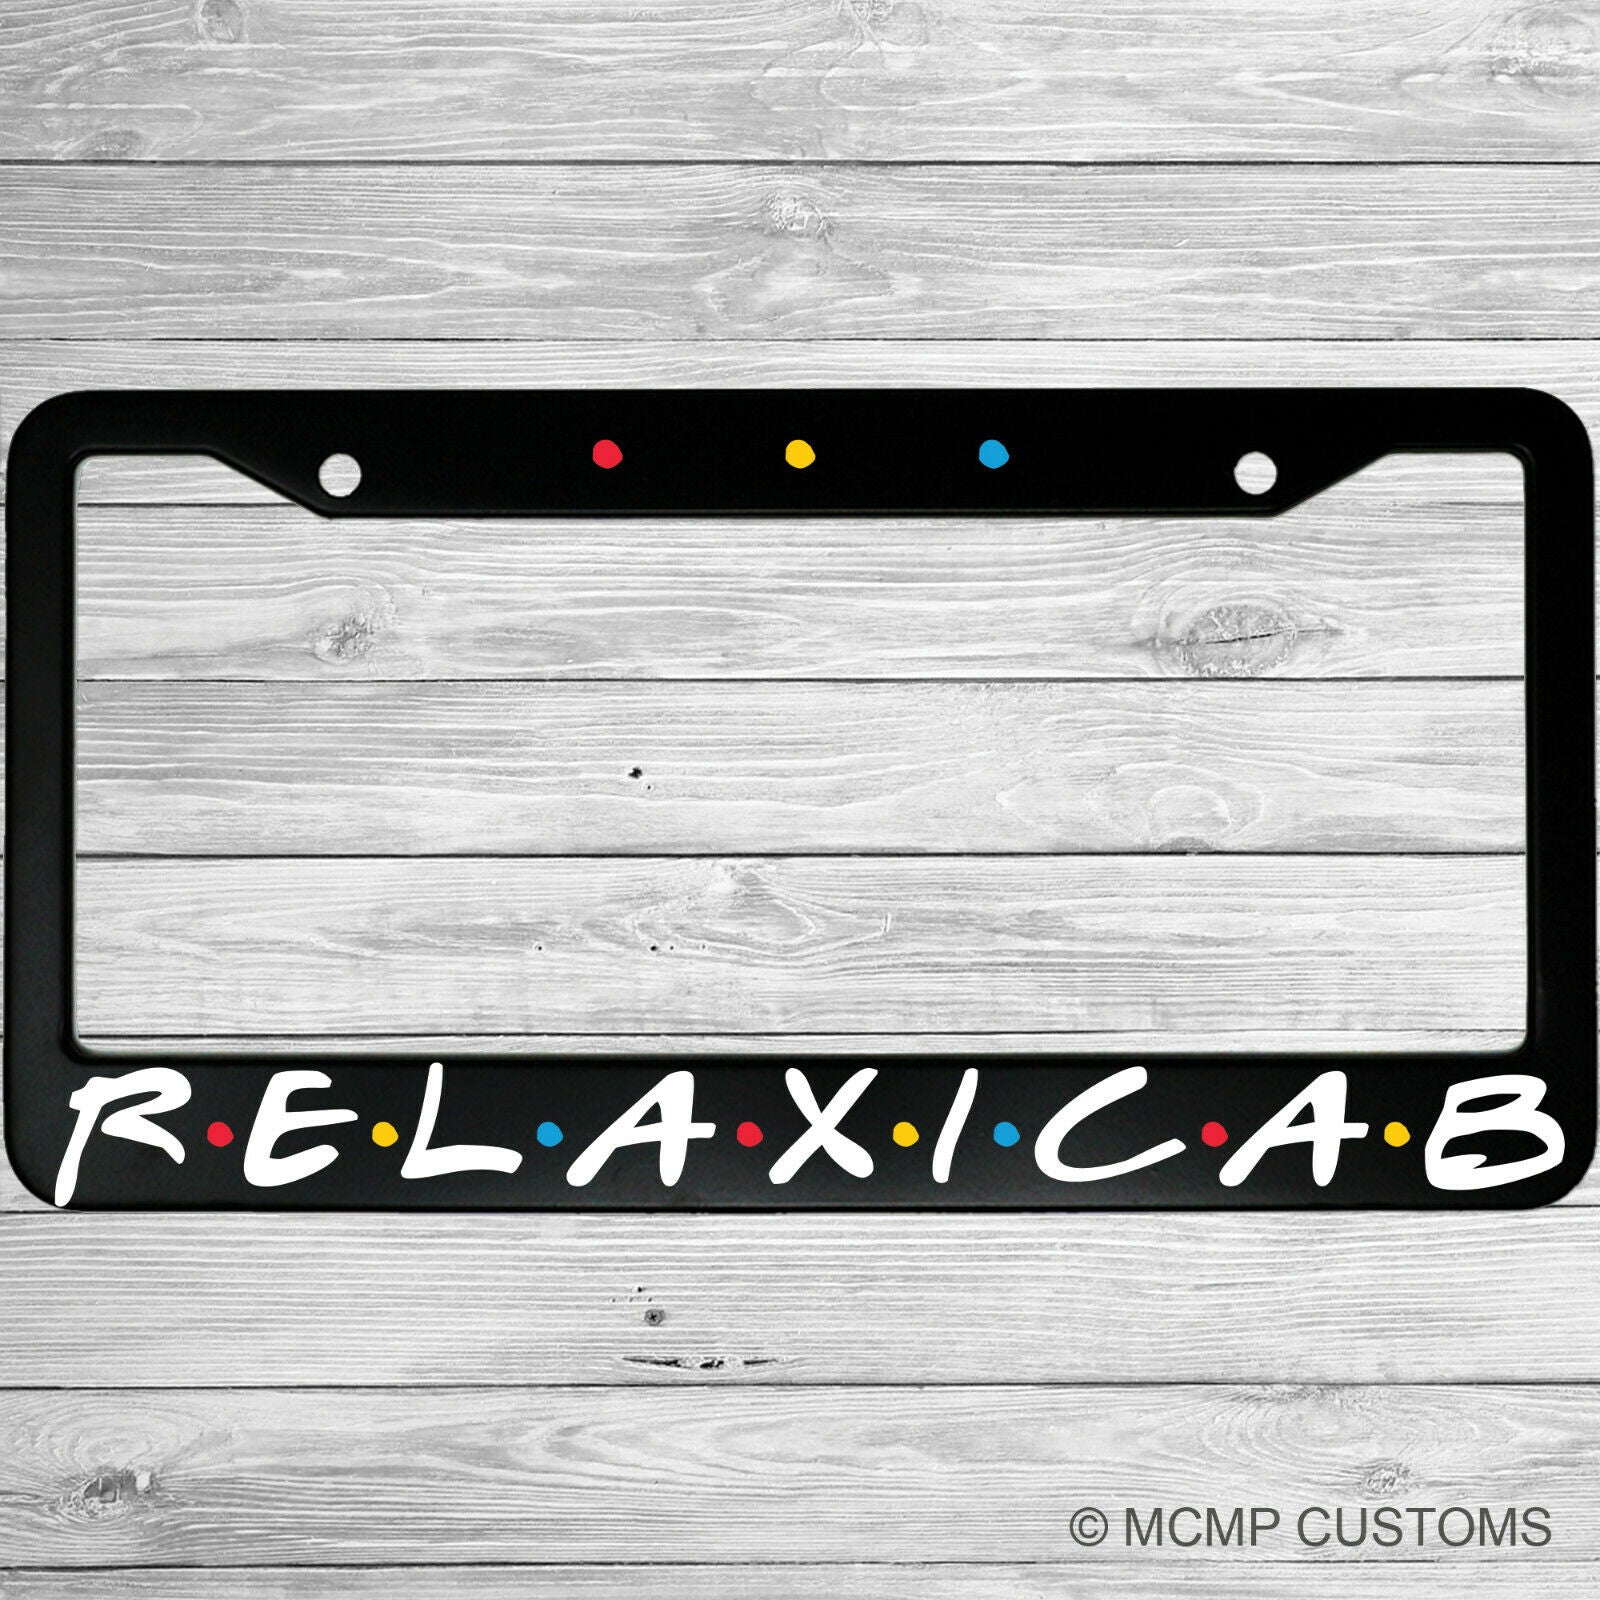 RelaxiCab